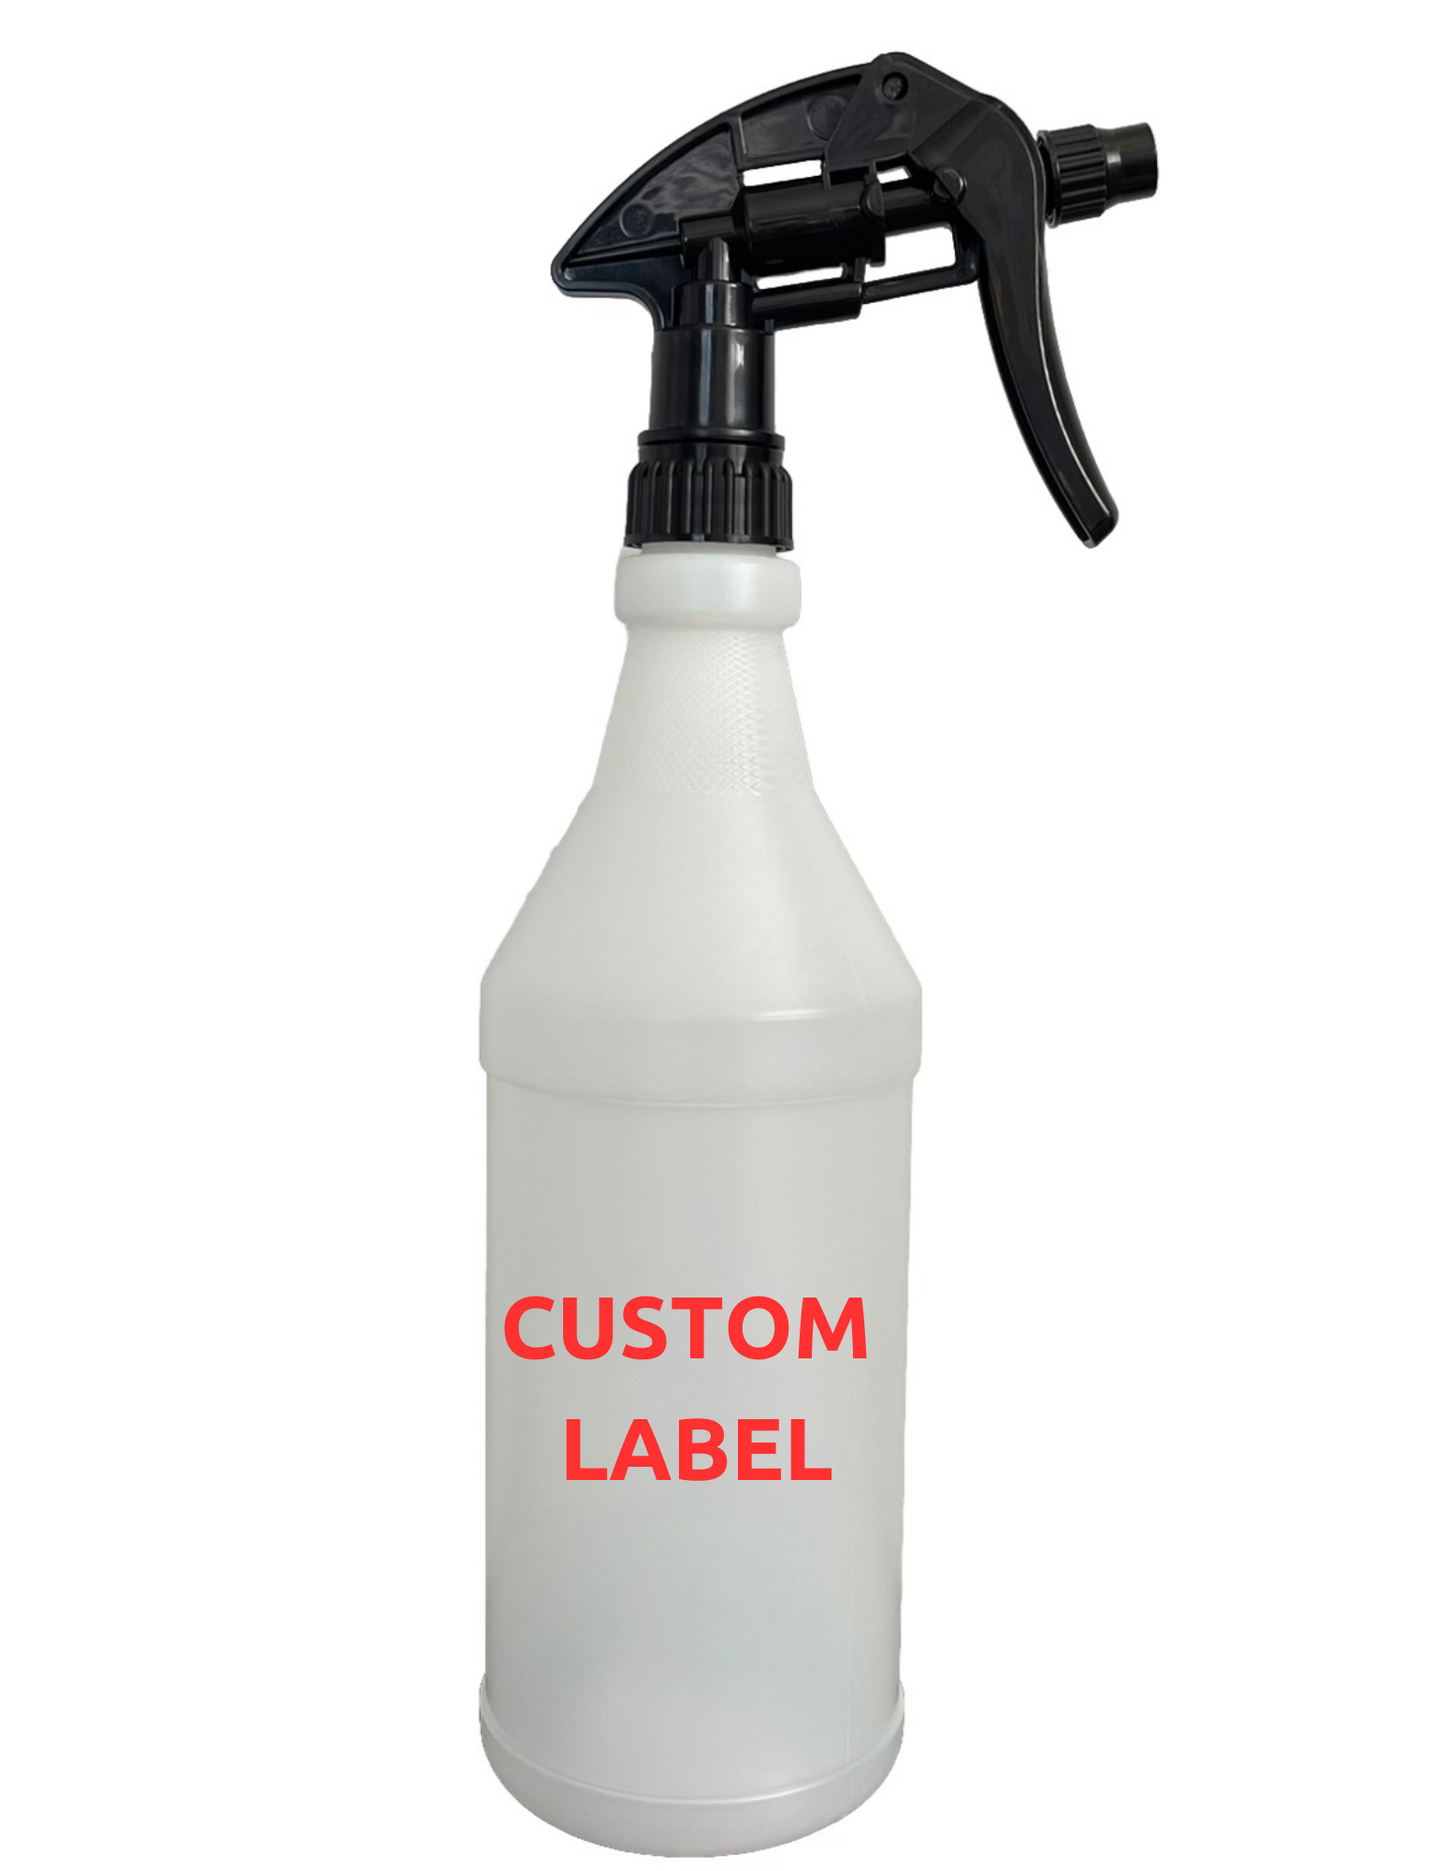 Willy's Wash - 32 ounce Spray Bottles - Custom Label (84 Units)